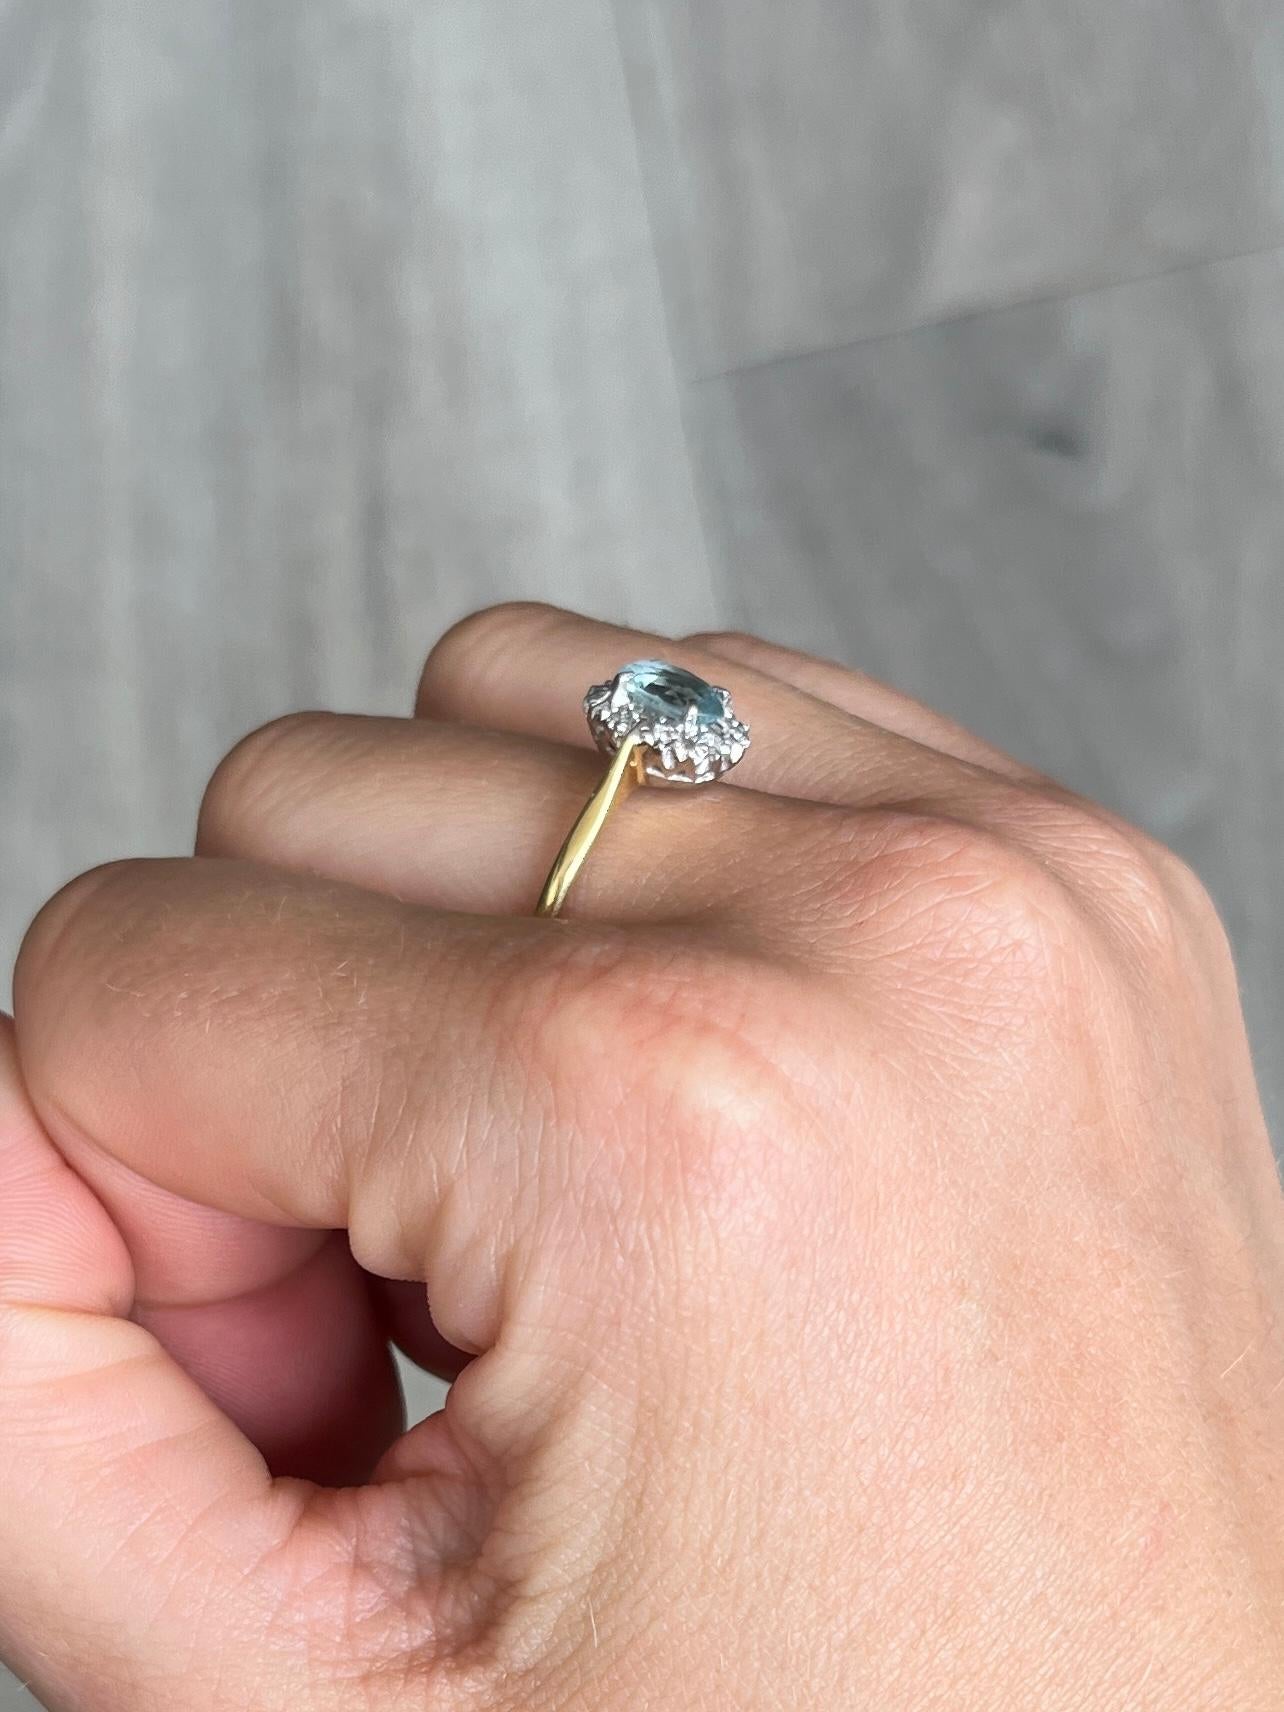 Sitting proud at the centre of this wonderful cluster ring is a sparkling aquamarine stone. Around the 80pt aquamarine stone sit a halo of smaller diamonds each measuring approximately 2pts each. All sit on an open work setting with simple